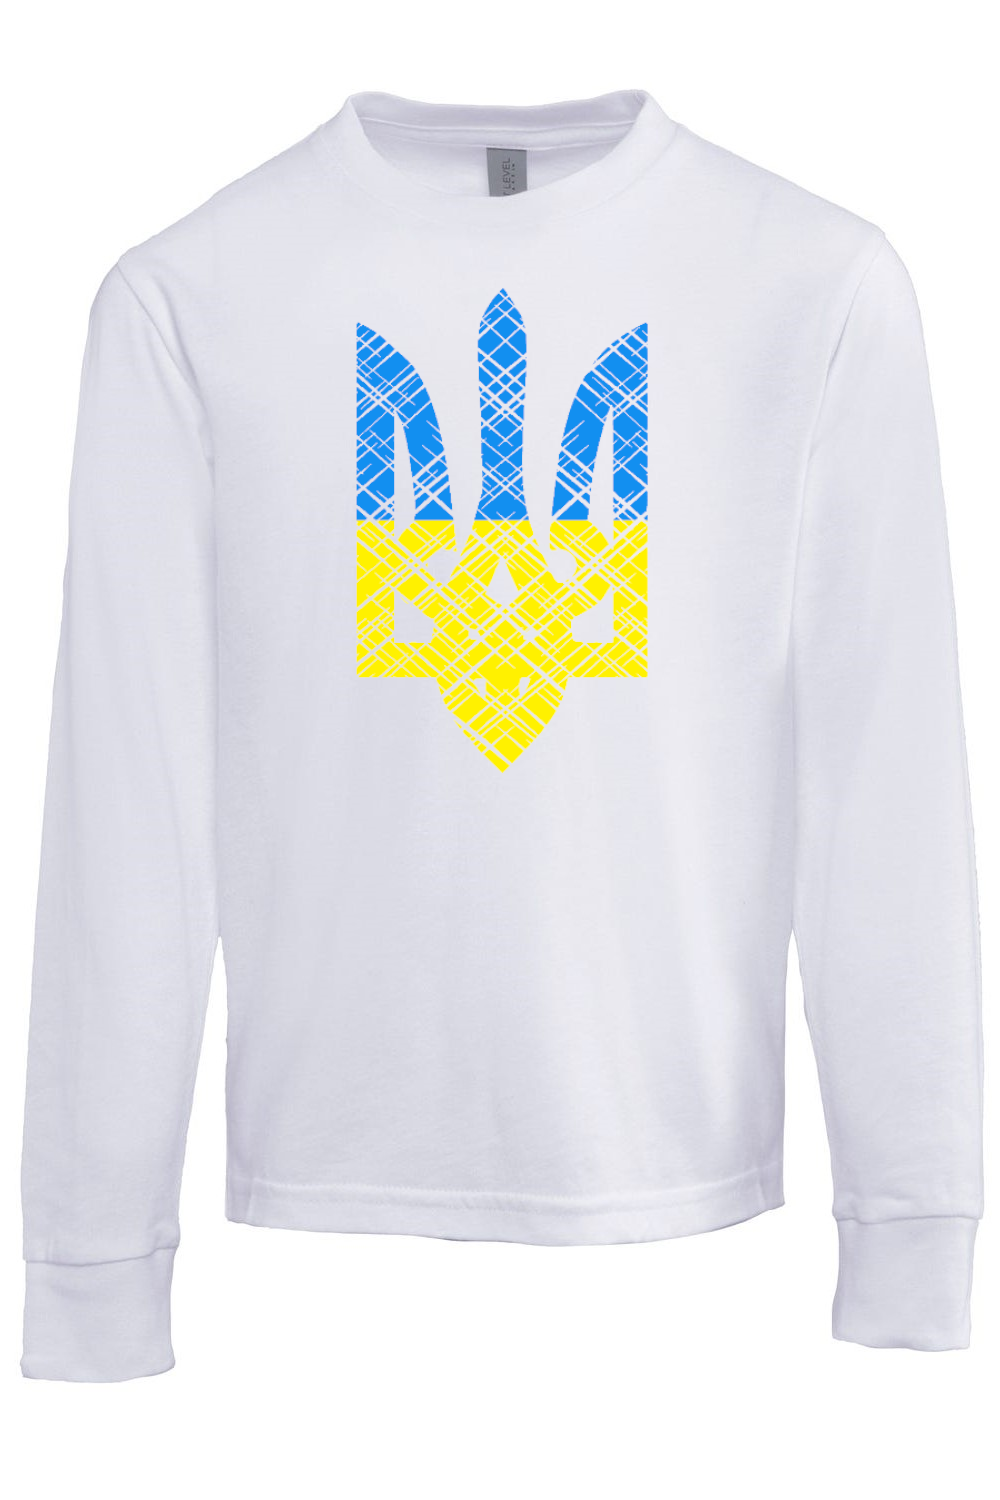 Youth long sleeve shirt "Trident"